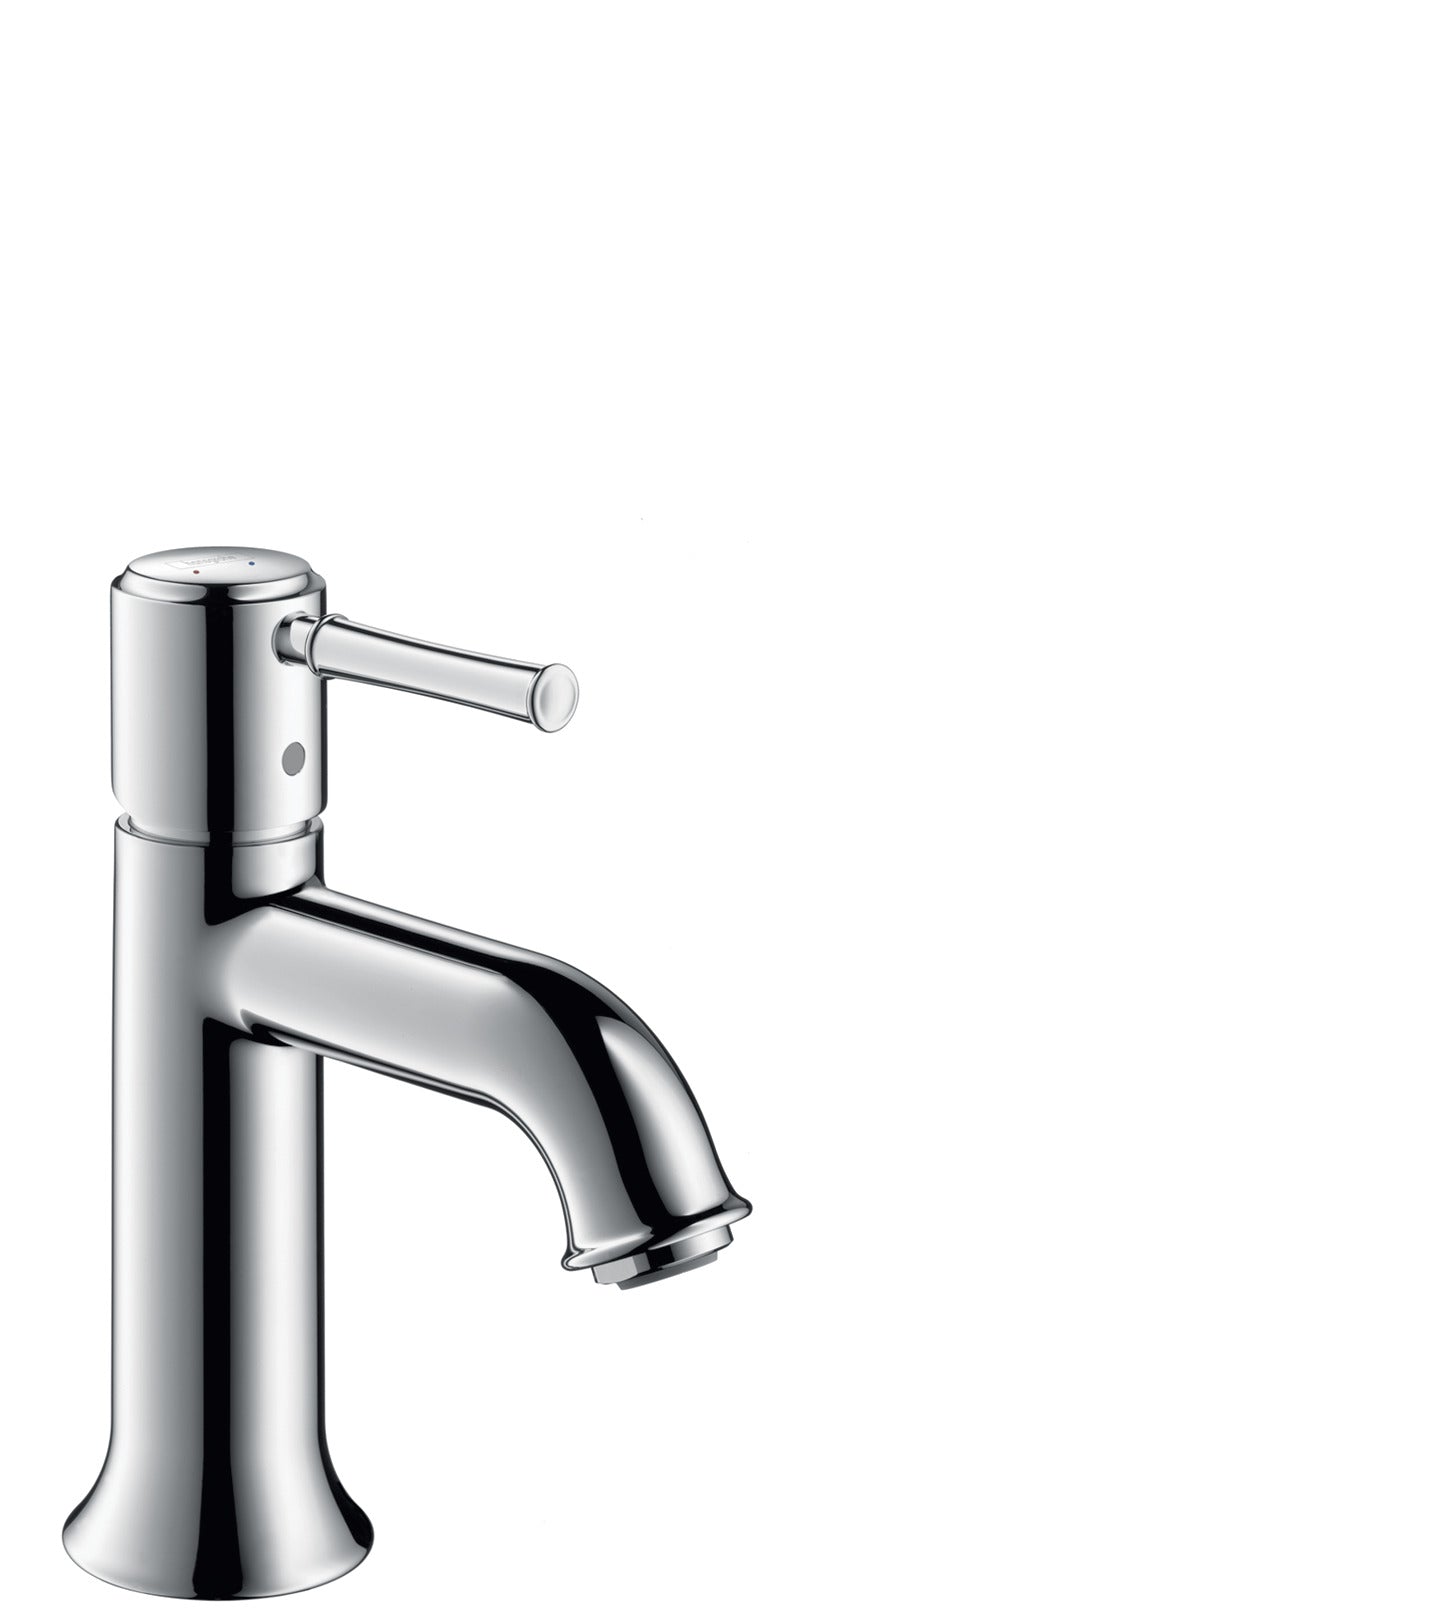 HANSGROHE 14111001 Talis C Single-Hole Faucet 80 with Pop-Up Drain, 1.2 GPM in Chrome